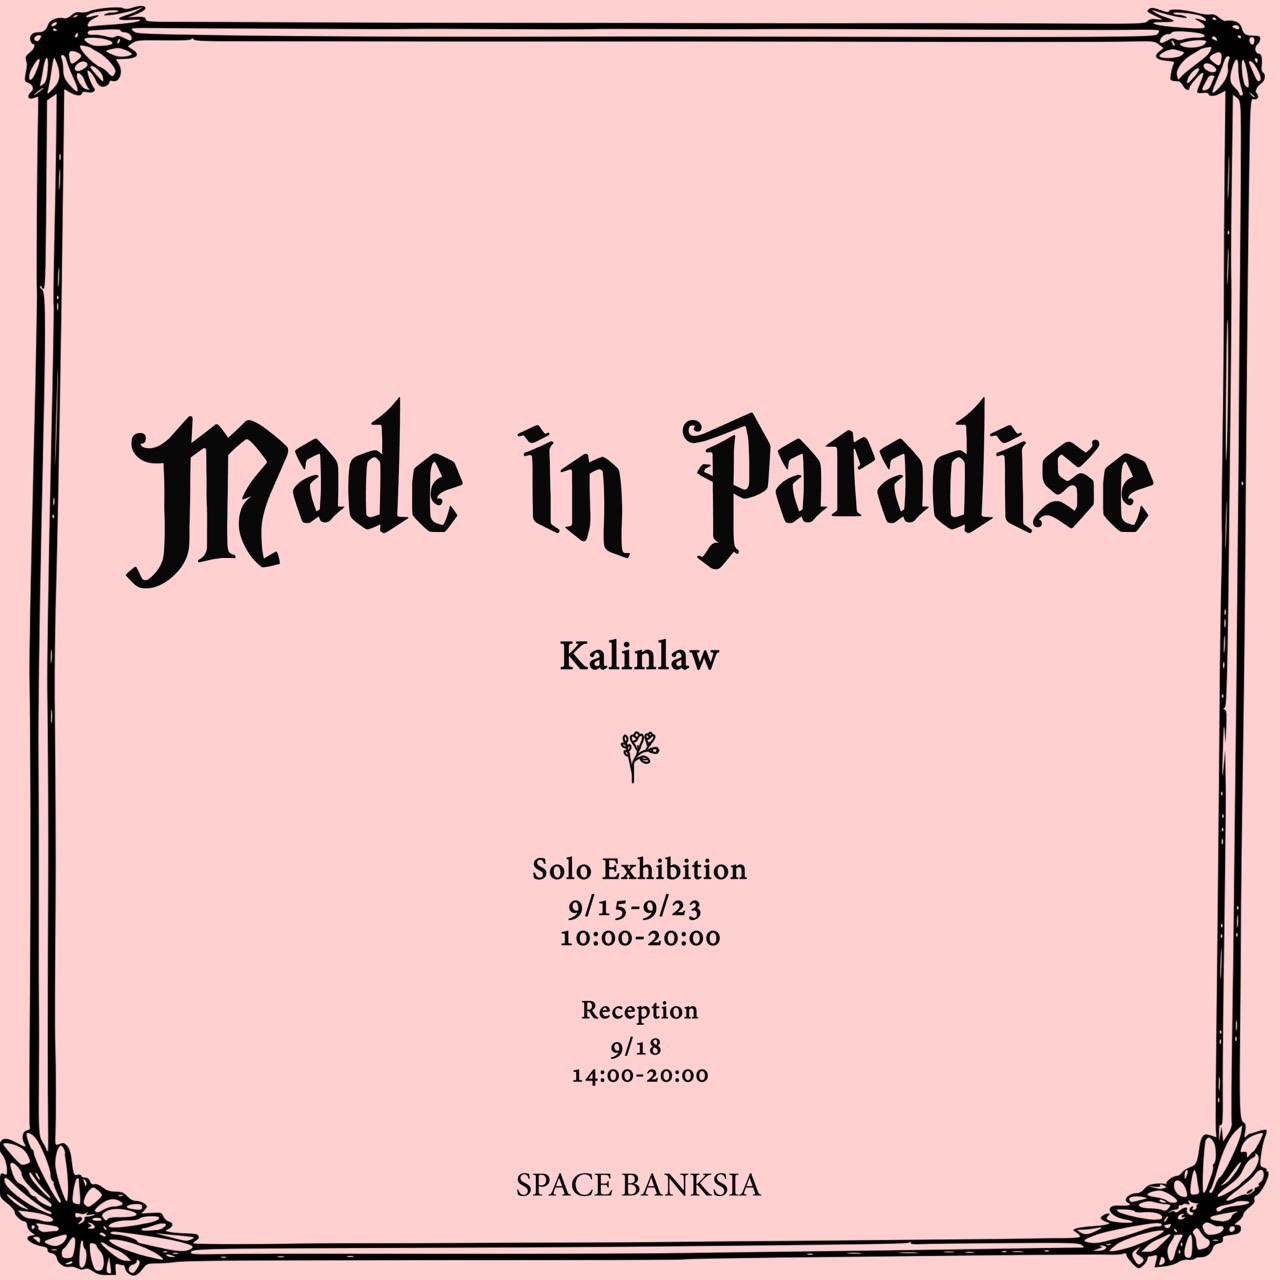 [made in paradise] ART EXHIBITION